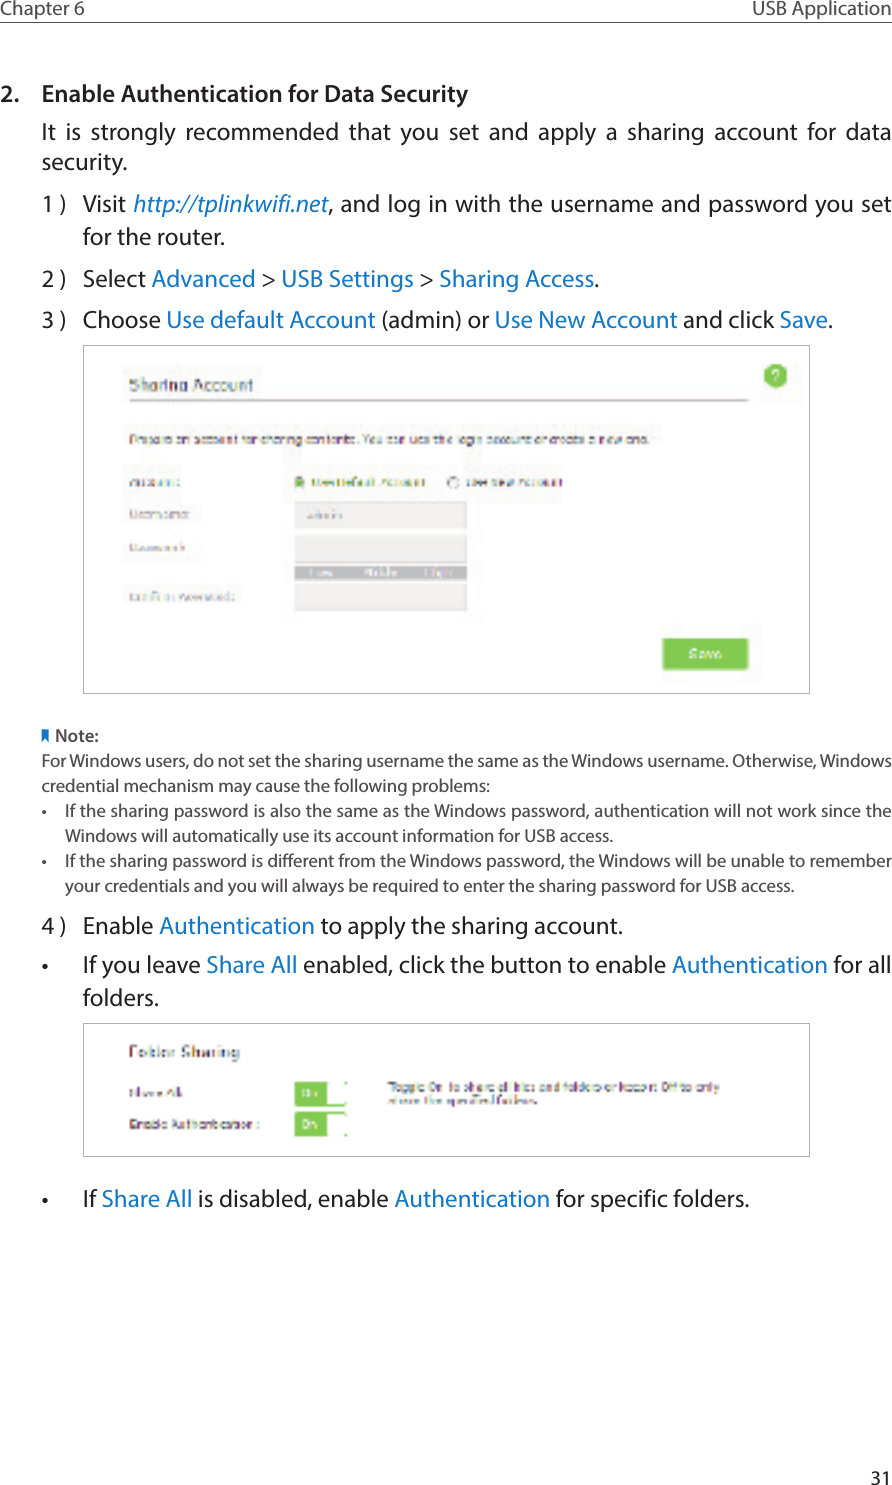 31Chapter 6 USB Application2.  Enable Authentication for Data SecurityIt is strongly recommended that you set and apply a sharing account for data security.1 )  Visit http://tplinkwifi.net, and log in with the username and password you set for the router.2 )  Select Advanced &gt; USB Settings &gt; Sharing Access. 3 )  Choose Use default Account (admin) or Use New Account and click Save.Note:For Windows users, do not set the sharing username the same as the Windows username. Otherwise, Windows credential mechanism may cause the following problems:•  If the sharing password is also the same as the Windows password, authentication will not work since the Windows will automatically use its account information for USB access.•  If the sharing password is different from the Windows password, the Windows will be unable to remember your credentials and you will always be required to enter the sharing password for USB access.4 )  Enable Authentication to apply the sharing account.•  If you leave Share All enabled, click the button to enable Authentication for all folders.•  If Share All is disabled, enable Authentication for specific folders.